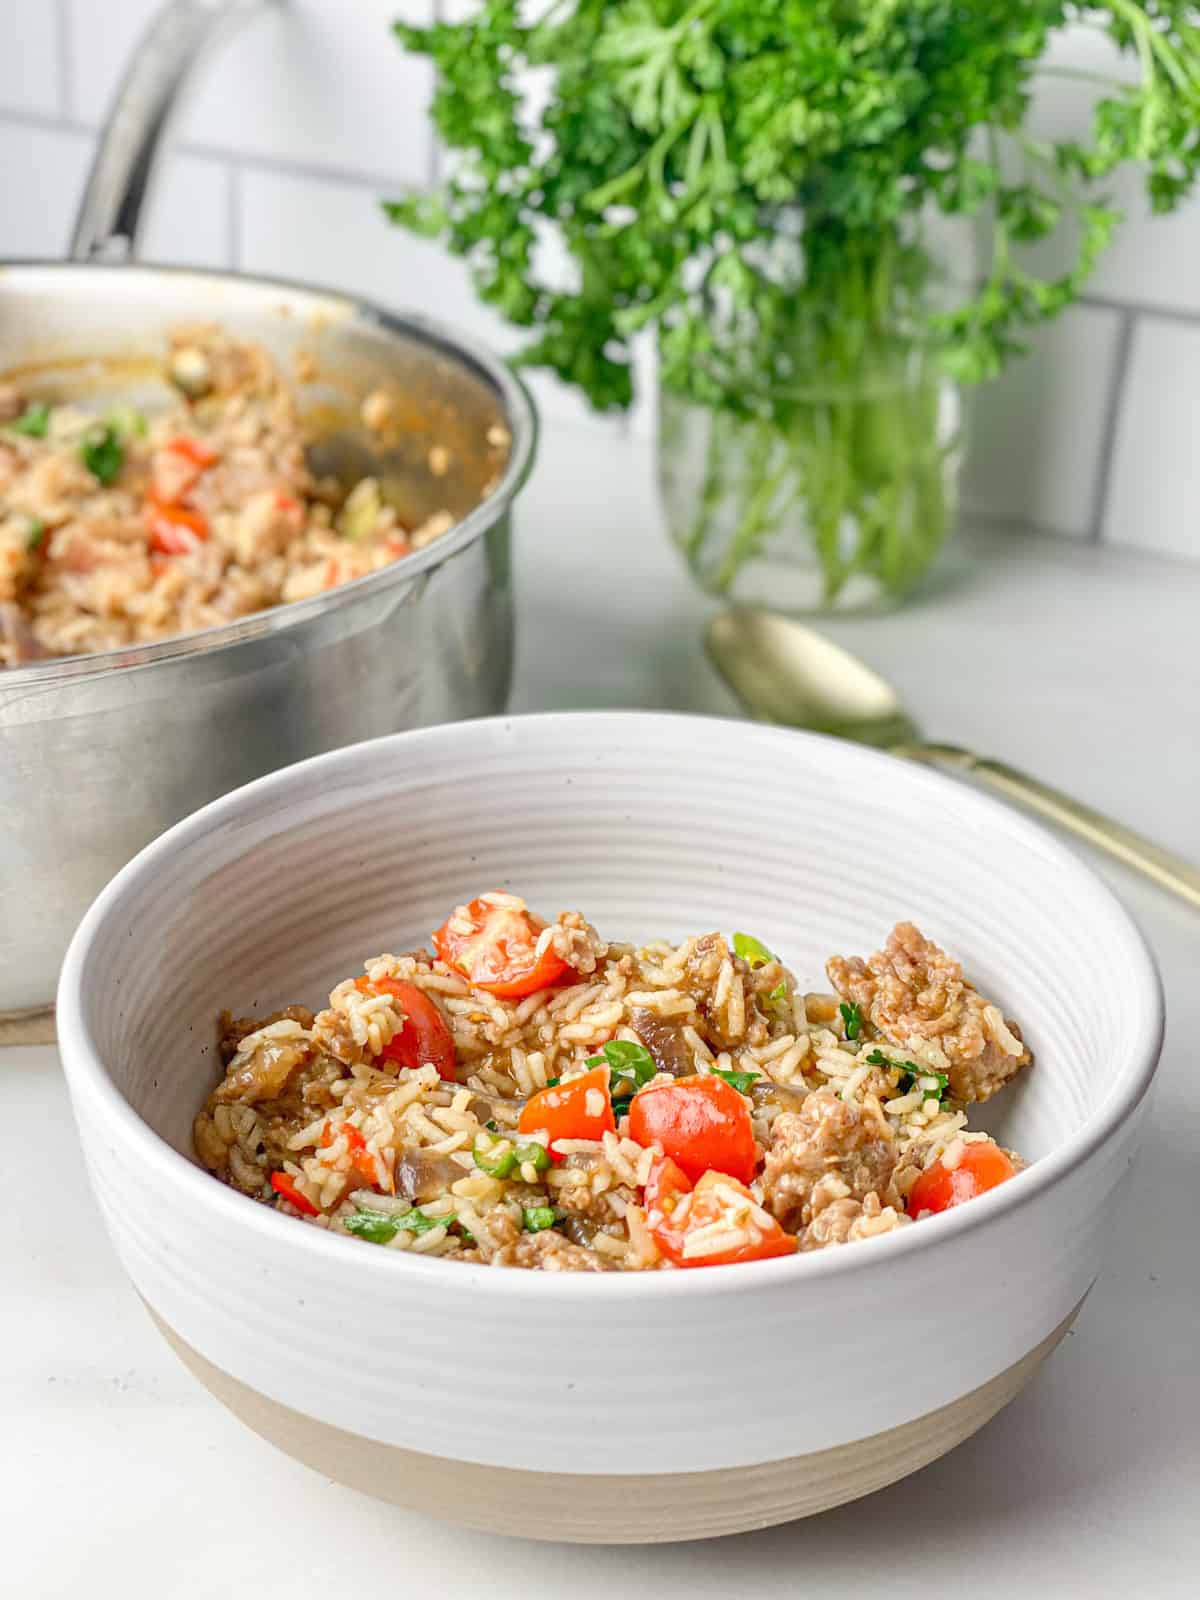 Spicy sausage rice in a white bowl with a tan bottom. Contents in bowl are light brown in color and topped with bright red tomatoes and green onions that have been lightly cooked. The background shows the pot of rice next to a gold spoon and fresh green parsley in a mason jar.